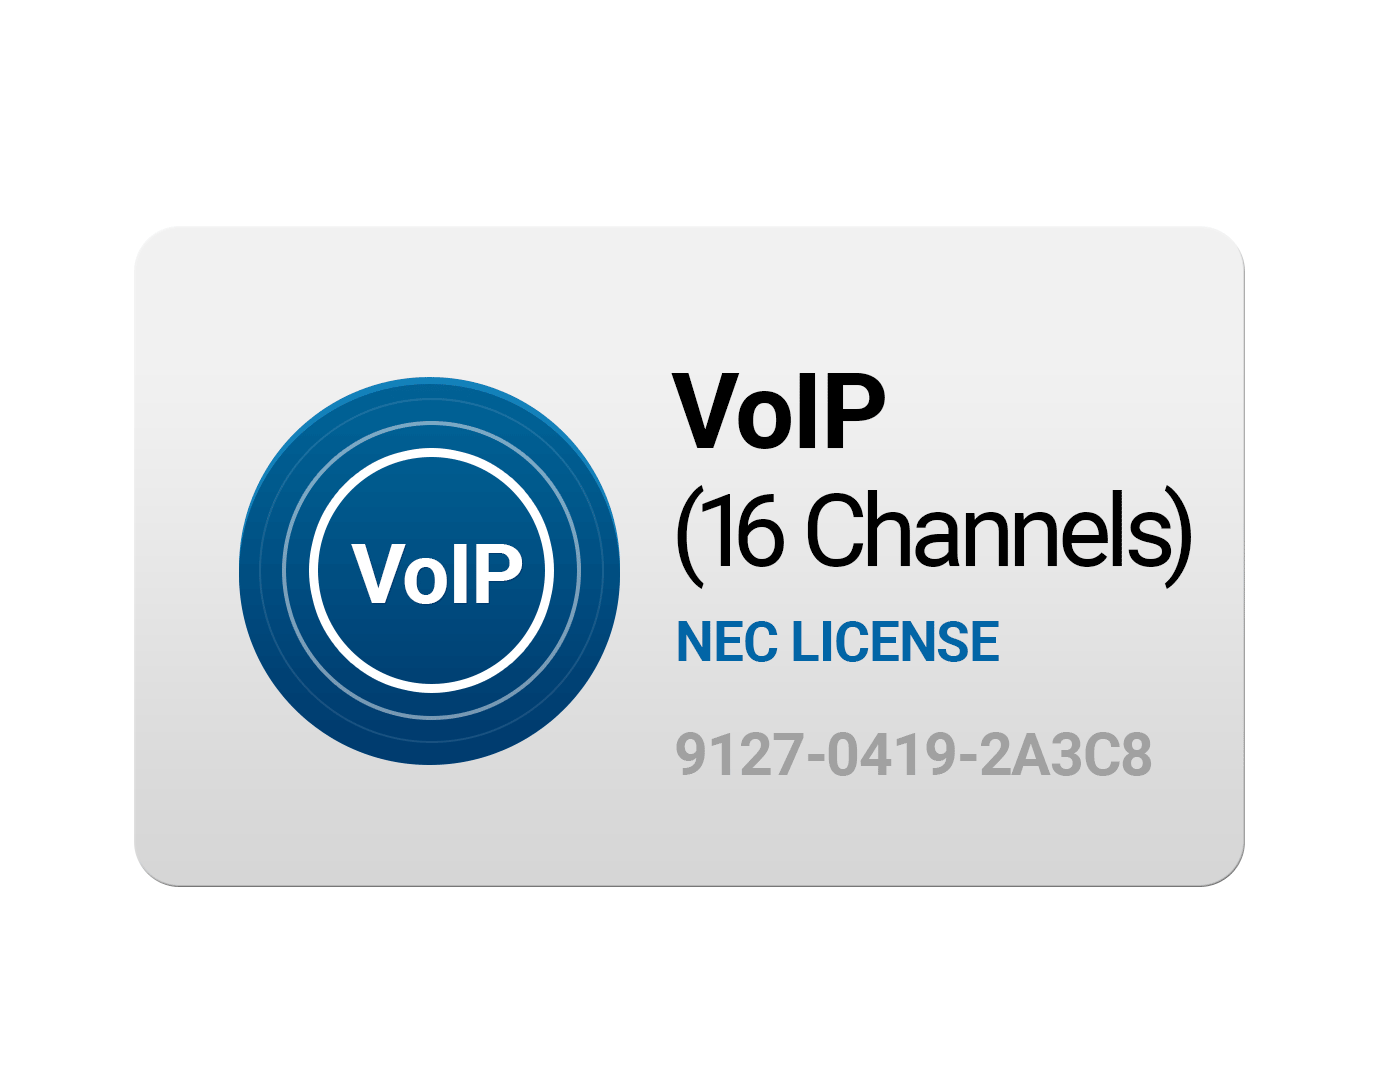 16-Channel VoIP License 1100082